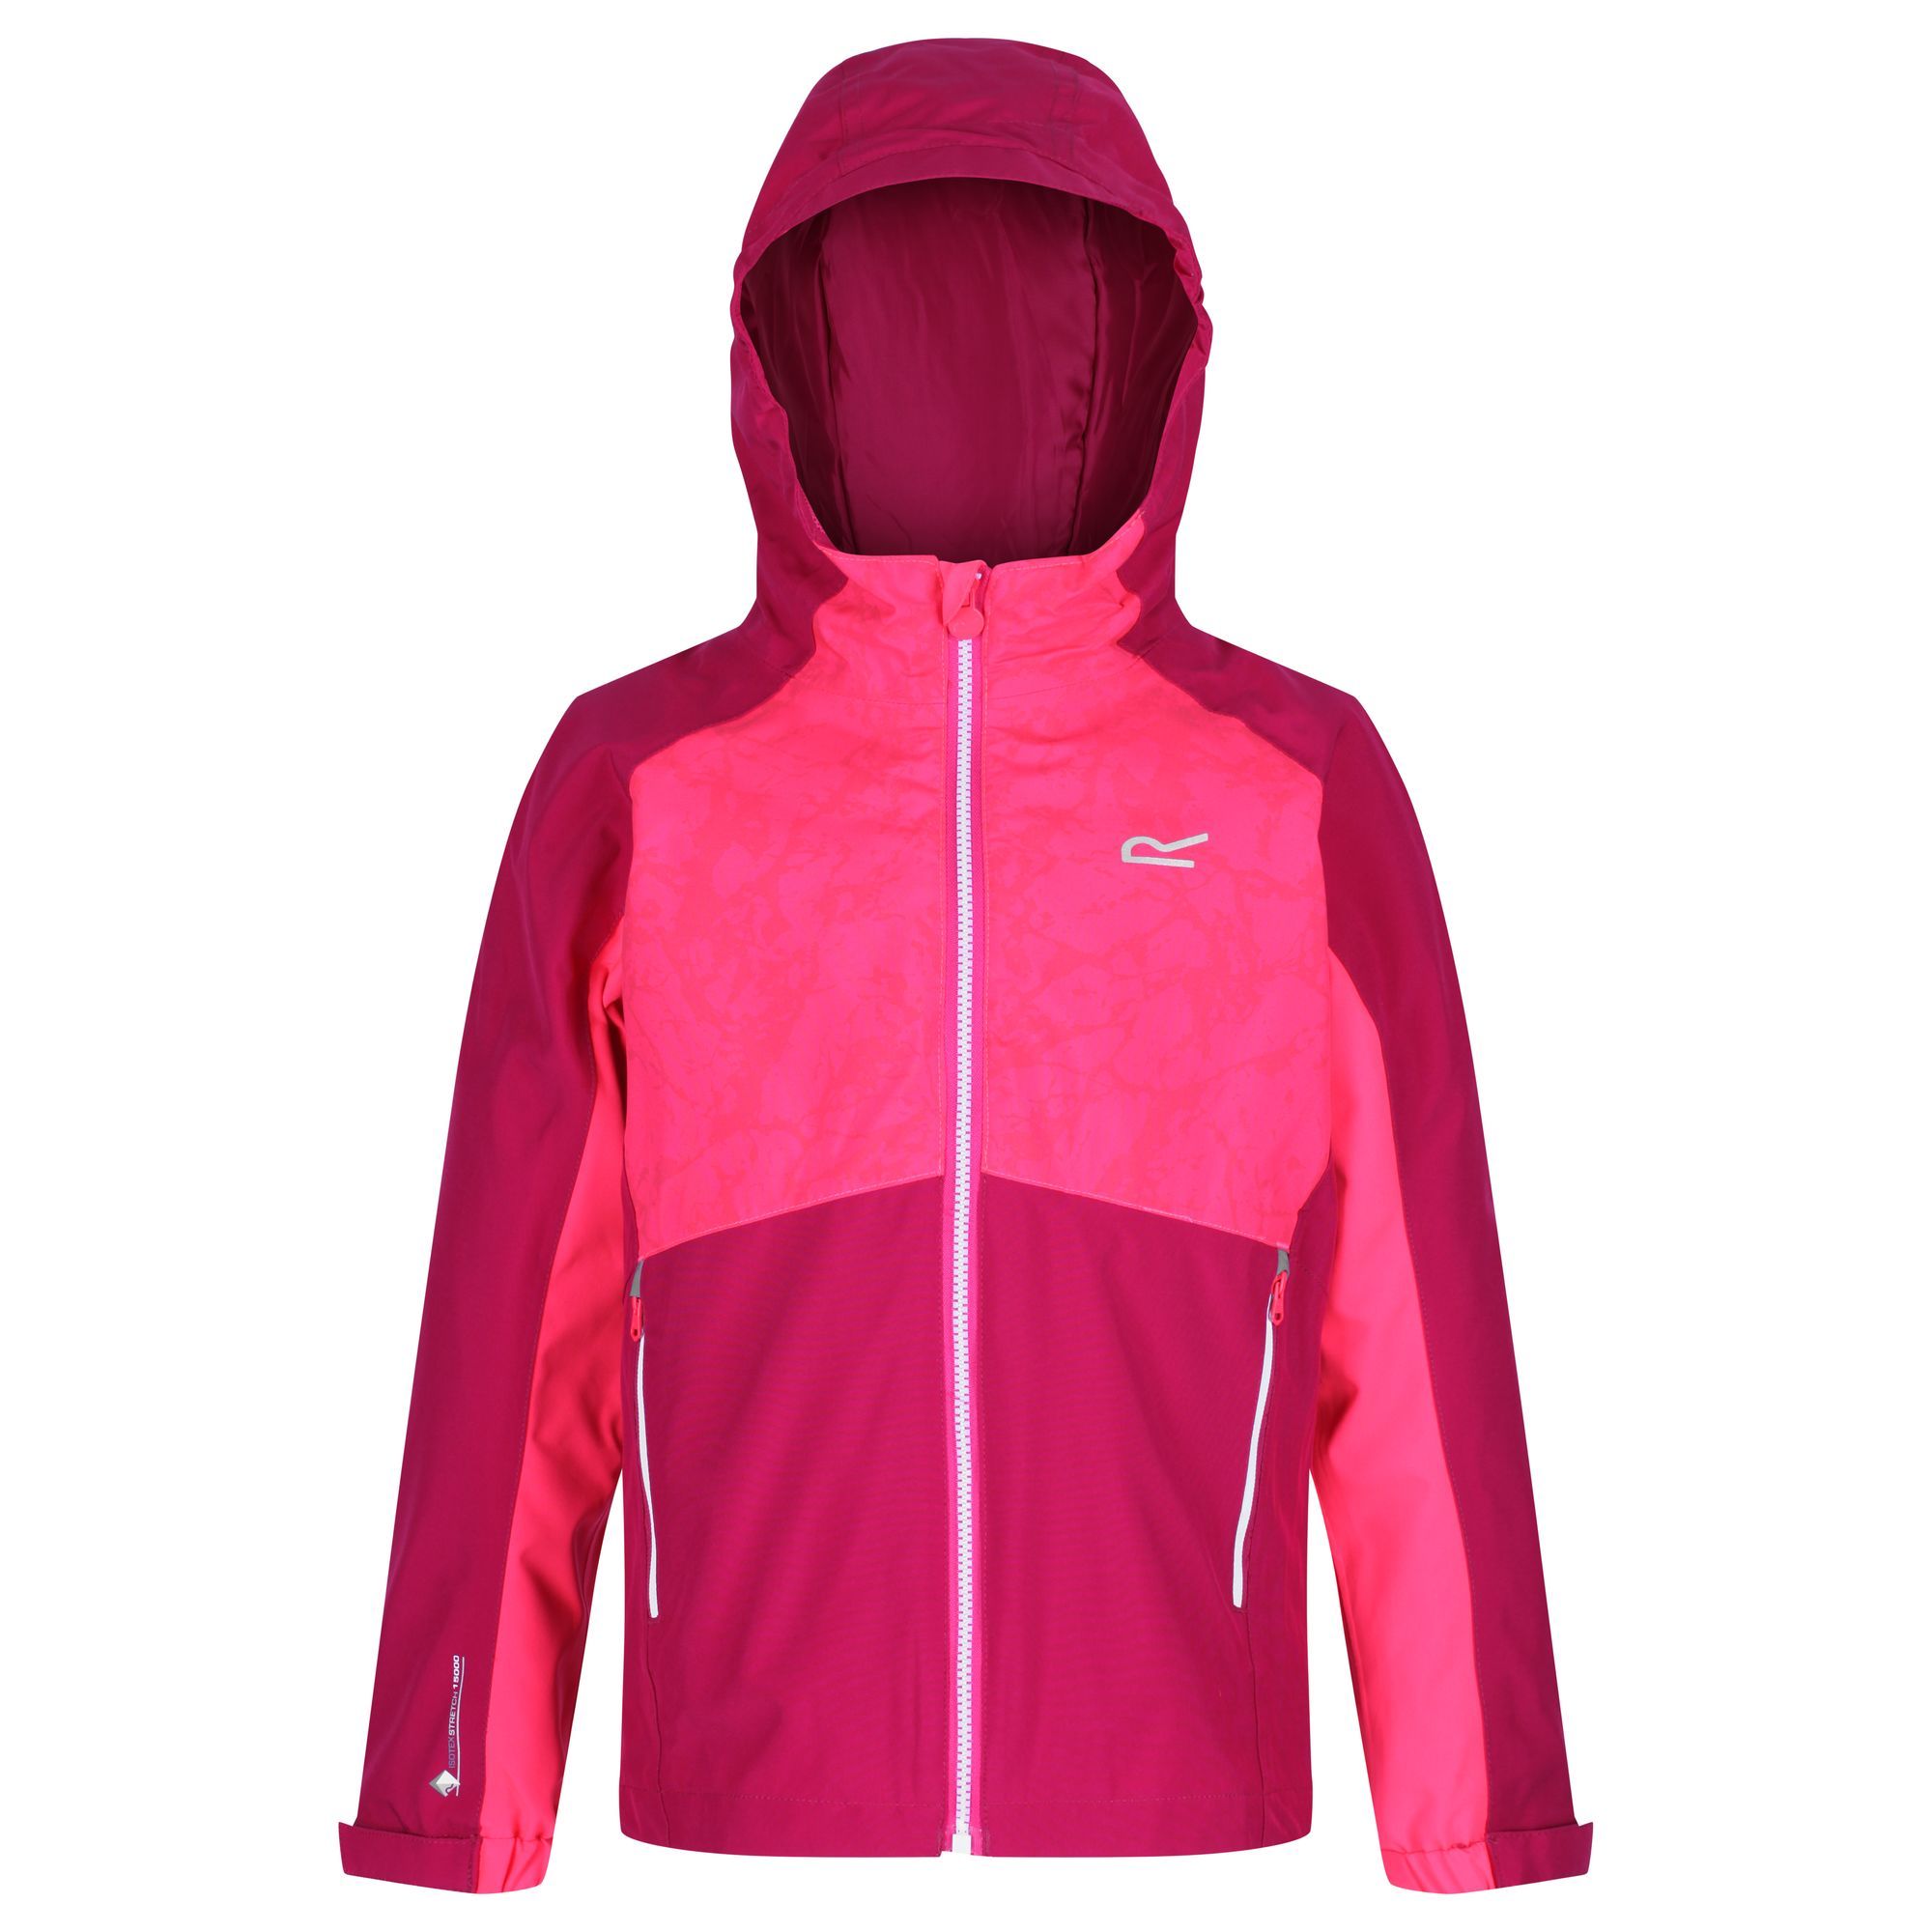 Material: polyester: 100%. Waterproof and breathable Isotex 15000 stretch fabric. Breathability rating: 10,000g/m2/24hrs. Highly reflective printed stretch panels in strategic zones for enhanced visability. Durable water repellent finish. Taped seams. Mesh lined. grown on hood with sewn on peak at front. 2 zipped lower pockets. Adjustable cuffs. Adjustable shockcord hem age 7+. Printed name label (up to age 8). Inner. 140gsm mini stripe microfleece. 2 lower pockets.